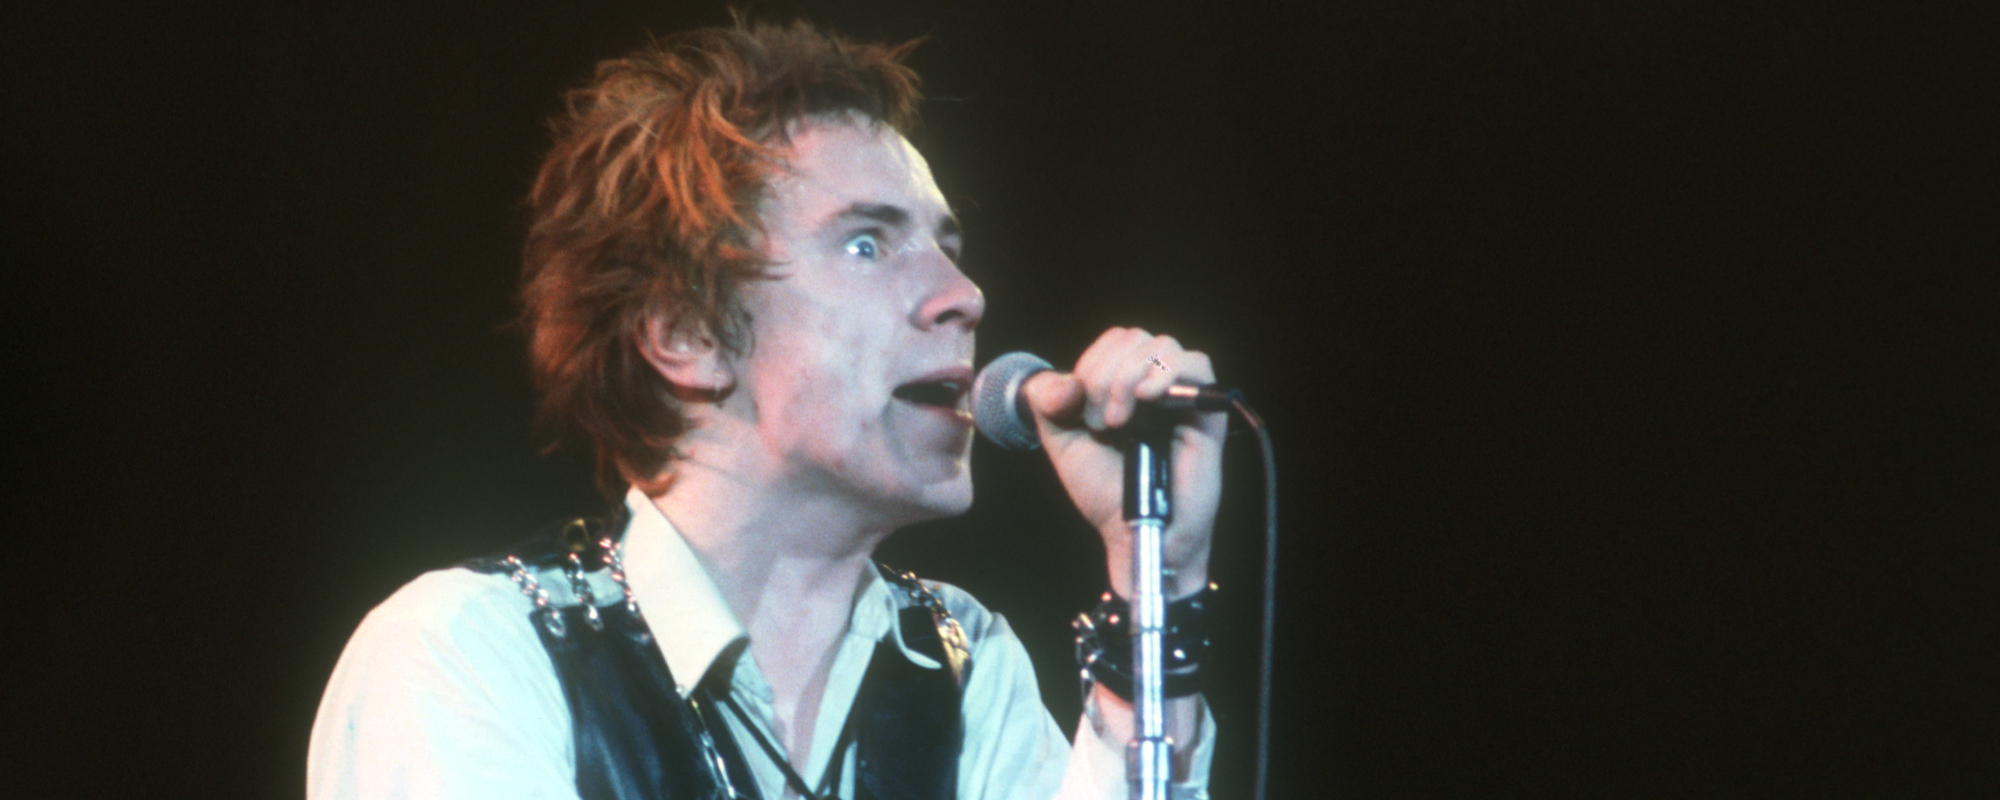 The Meaning of “God Save the Queen” by Sex Pistols and Why It Never Charted at No. 1—Even Though It Should Have